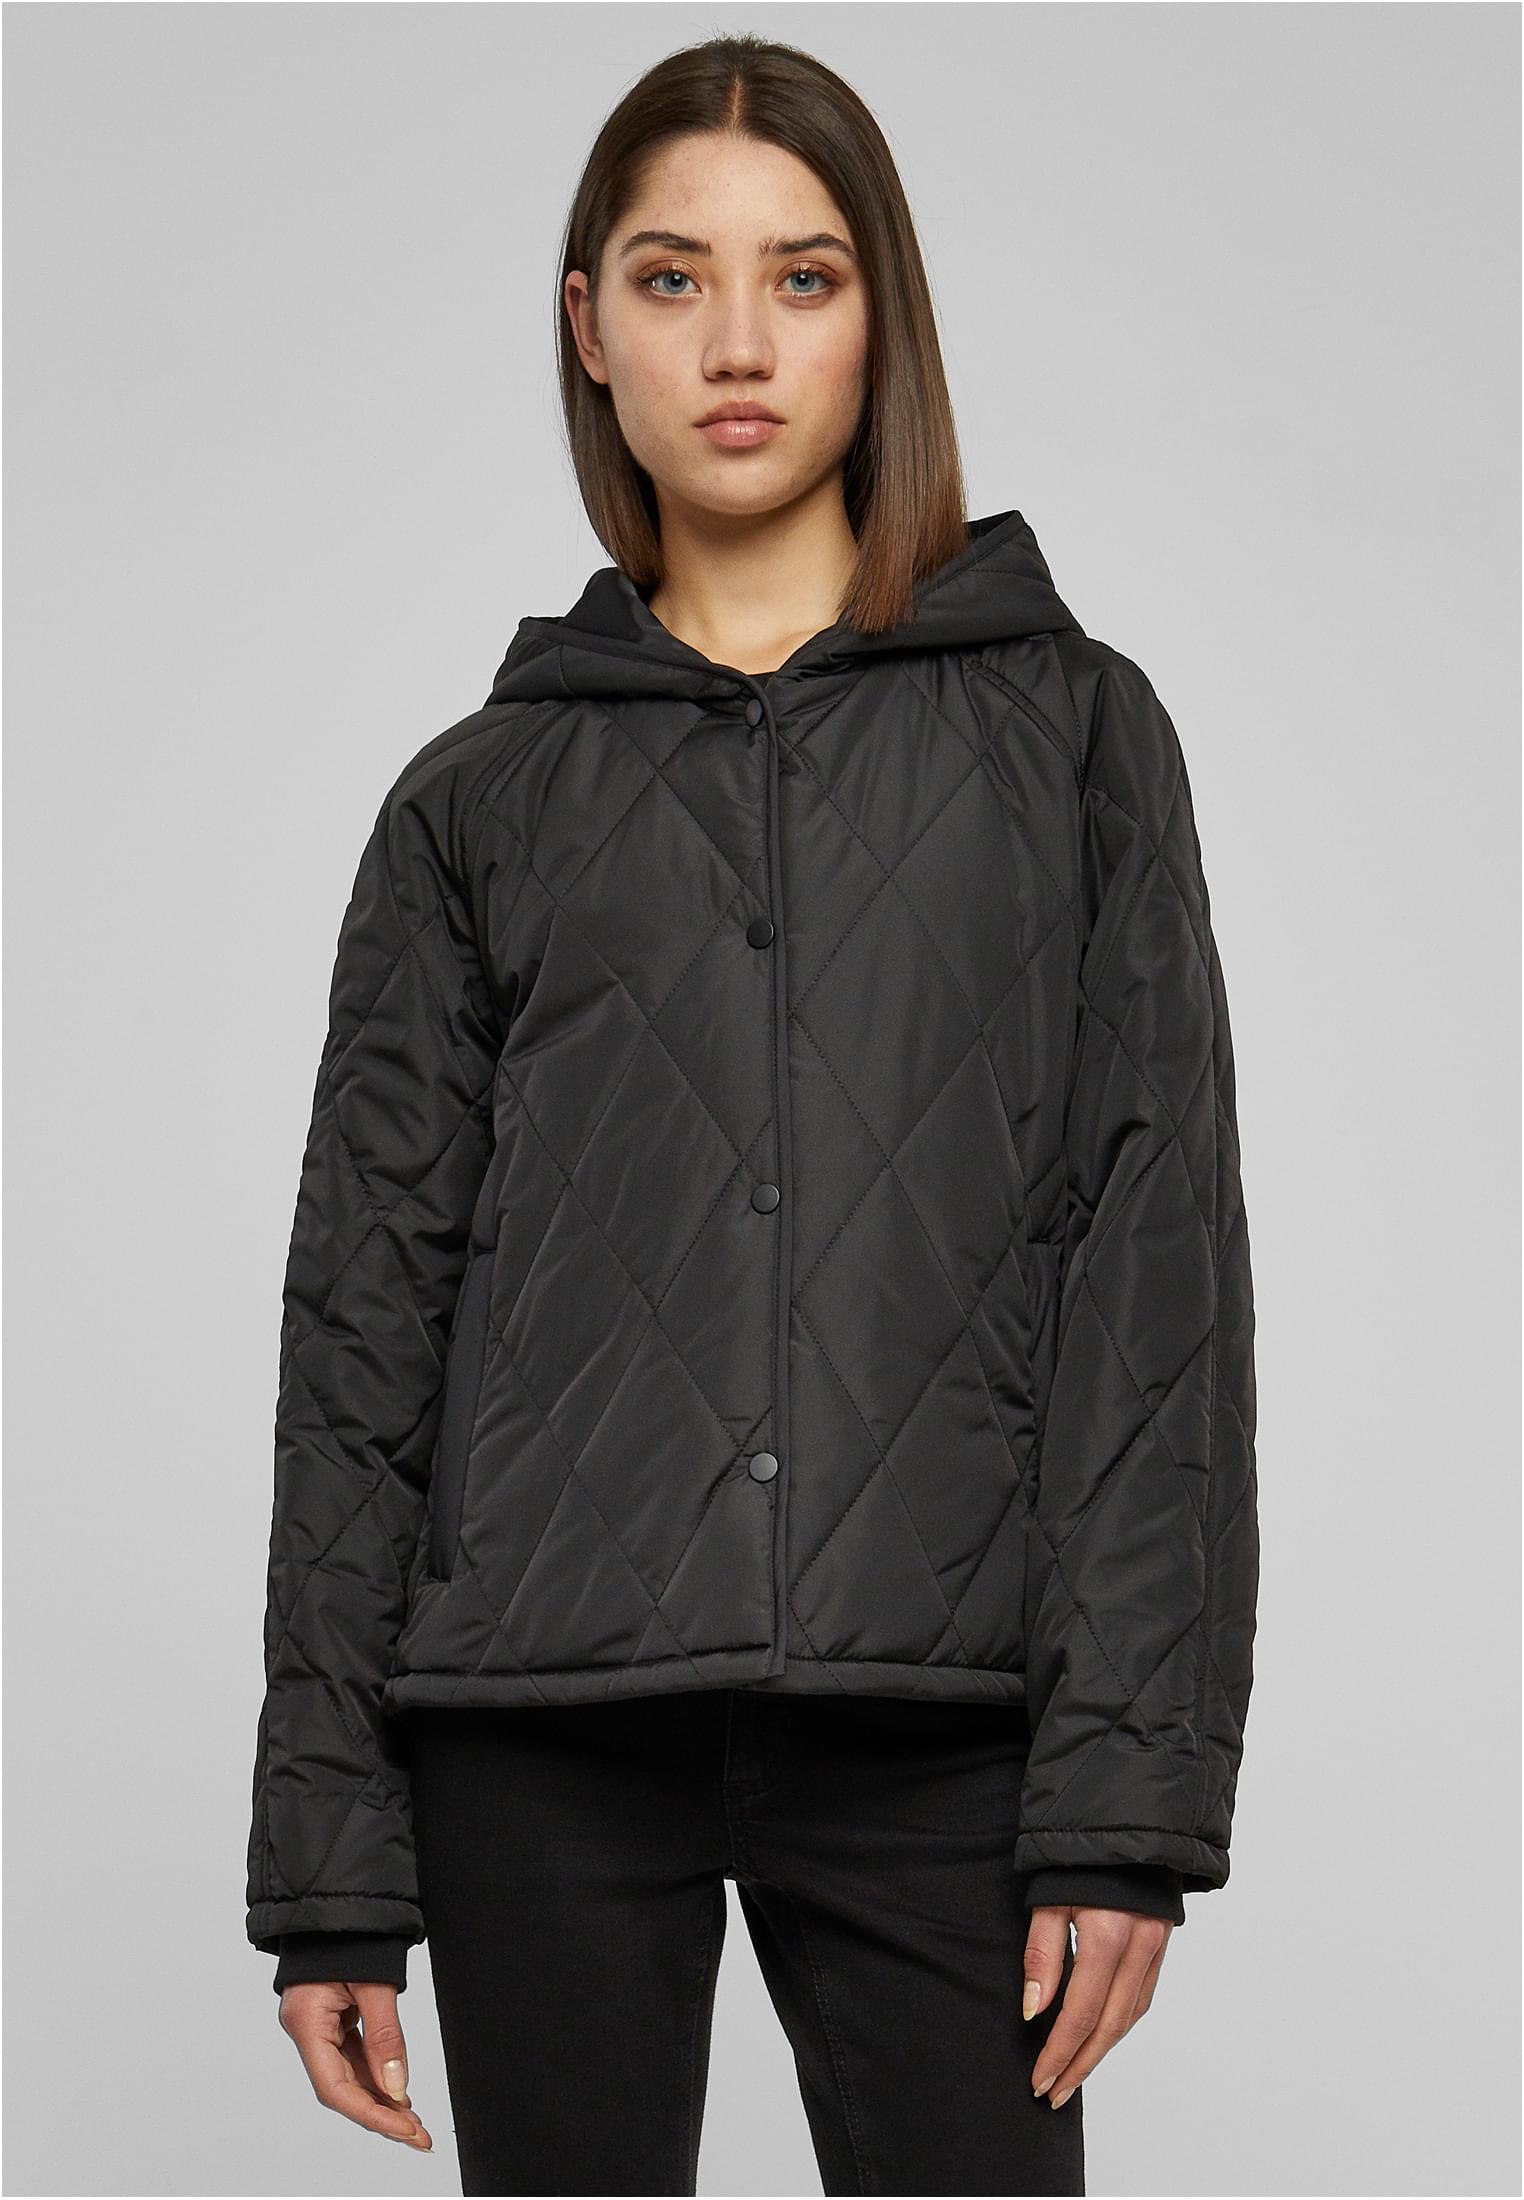 Hooded Jacket-TB6067 Quilted Diamond Oversized Ladies